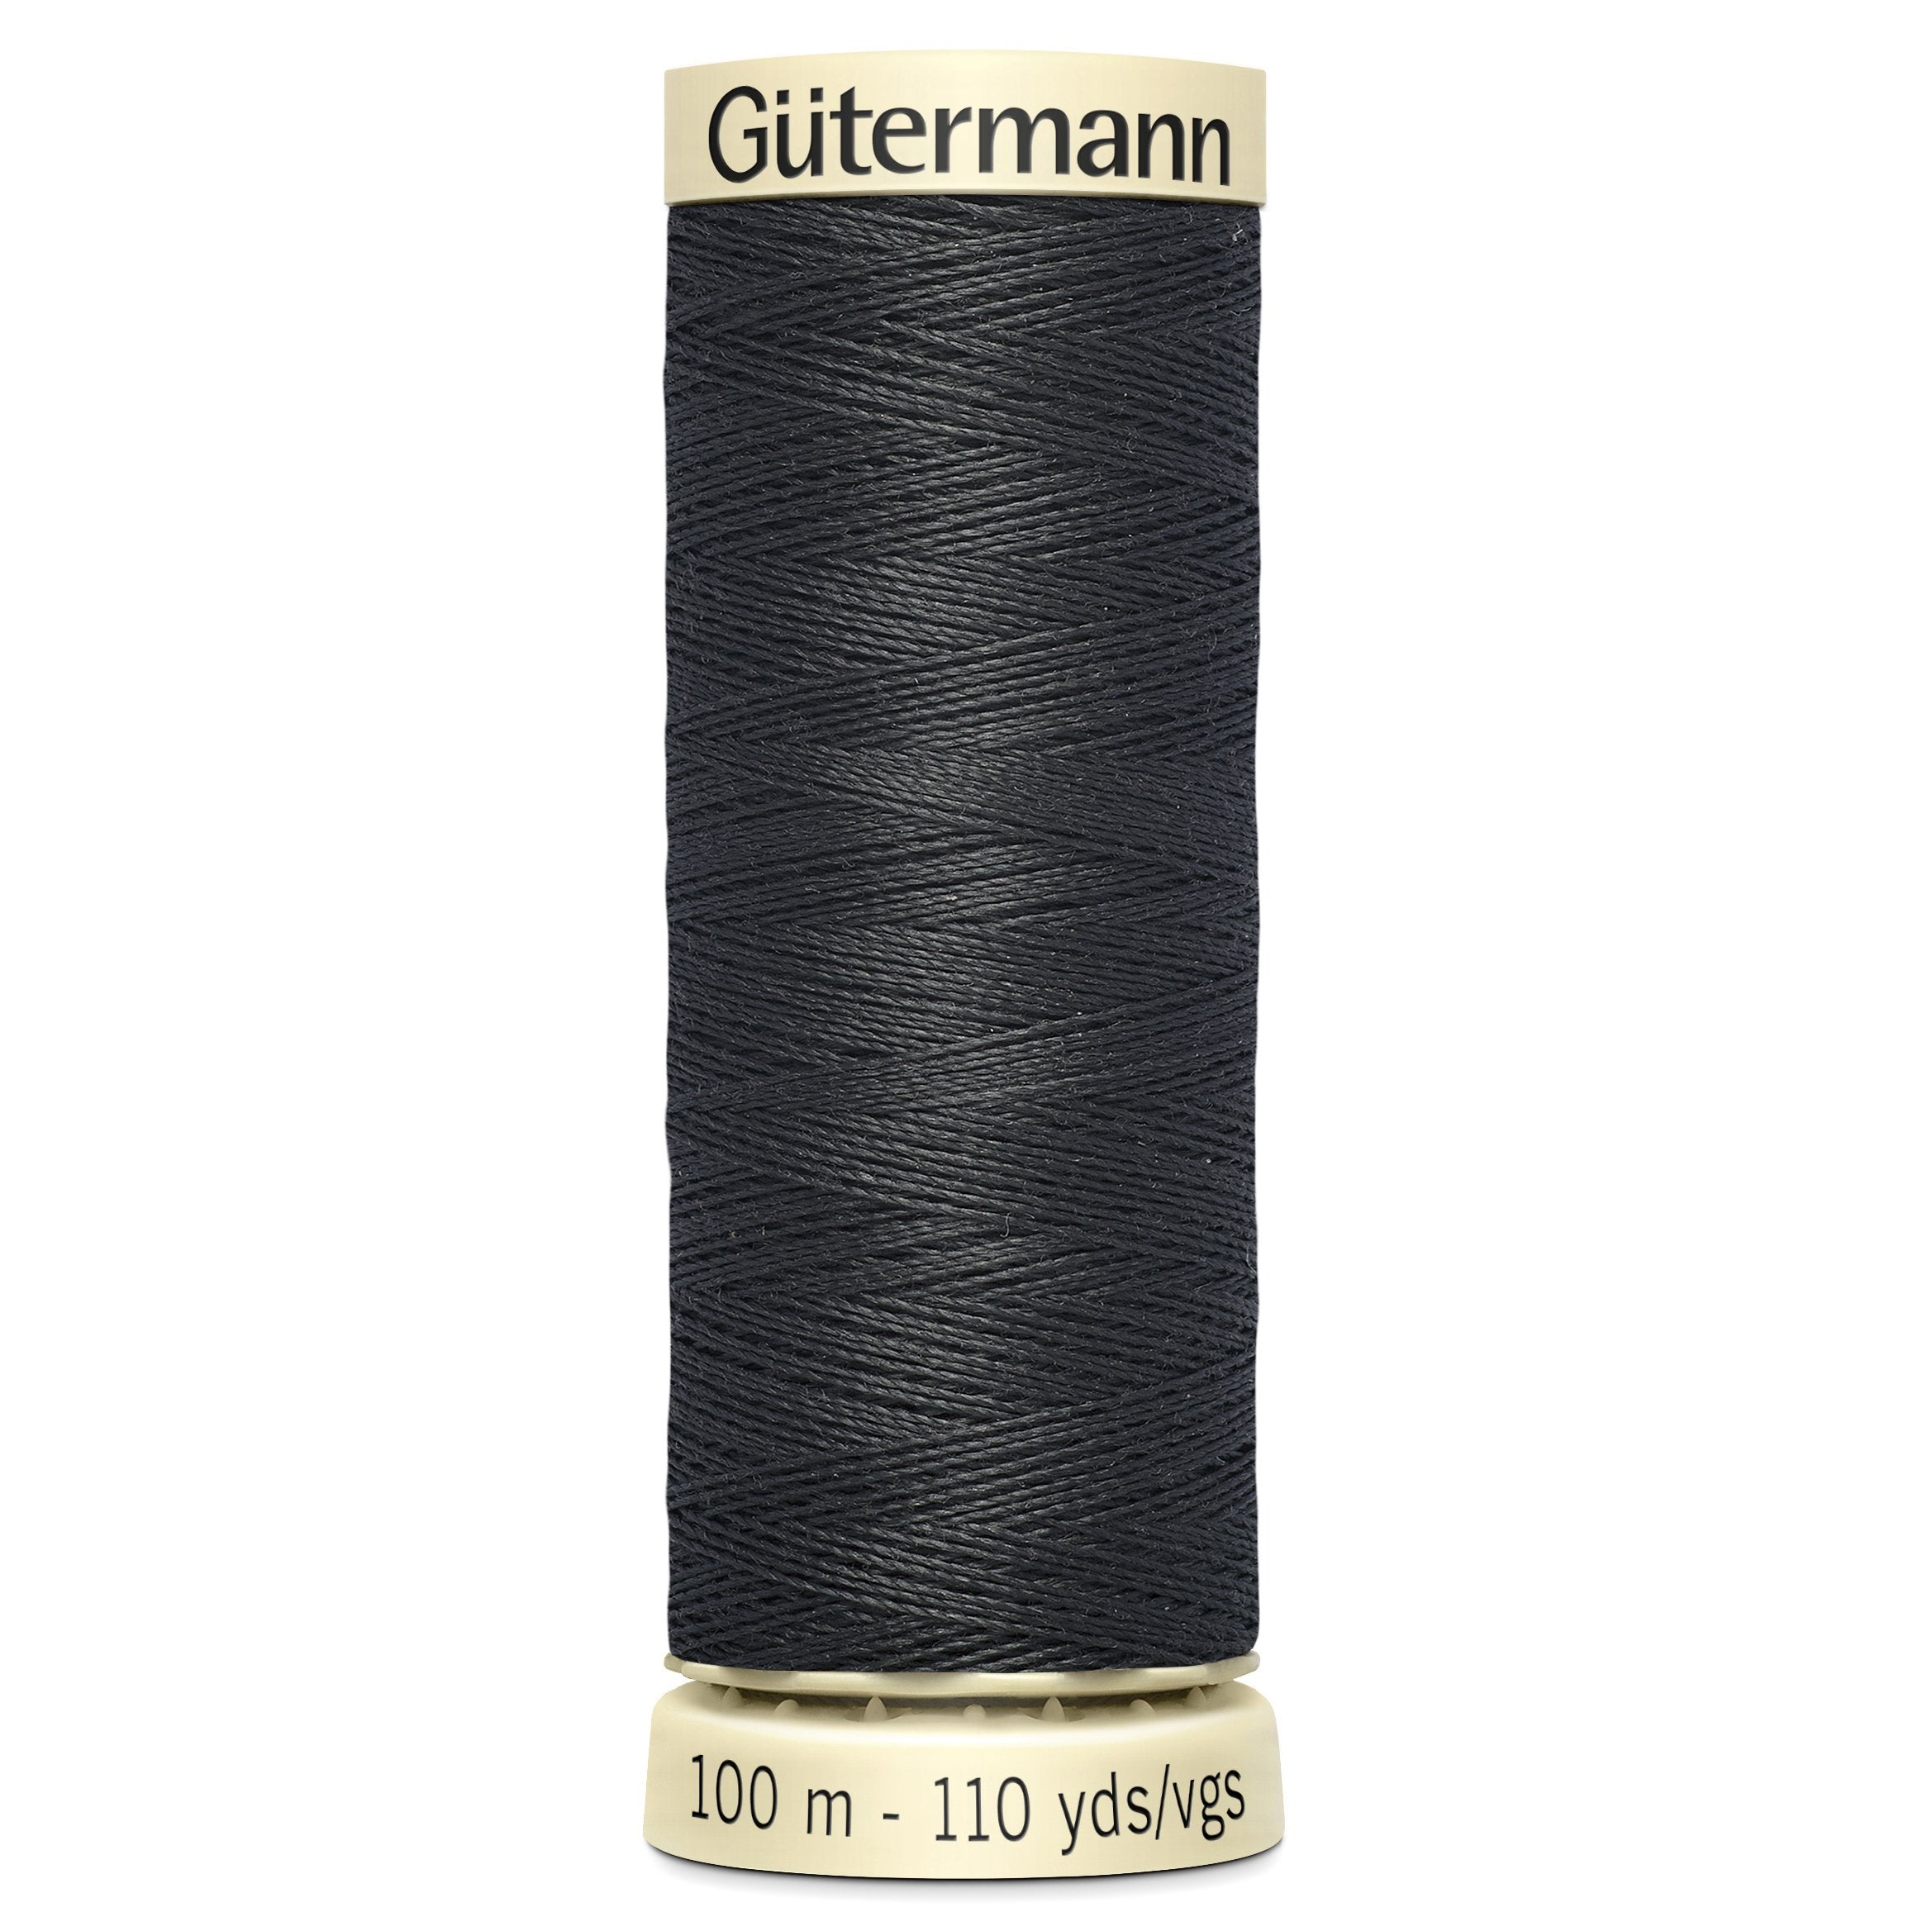 Gutermann Sew-All Polyester Sewing Thread 190 Very Dark Brown from Jaycotts Sewing Supplies